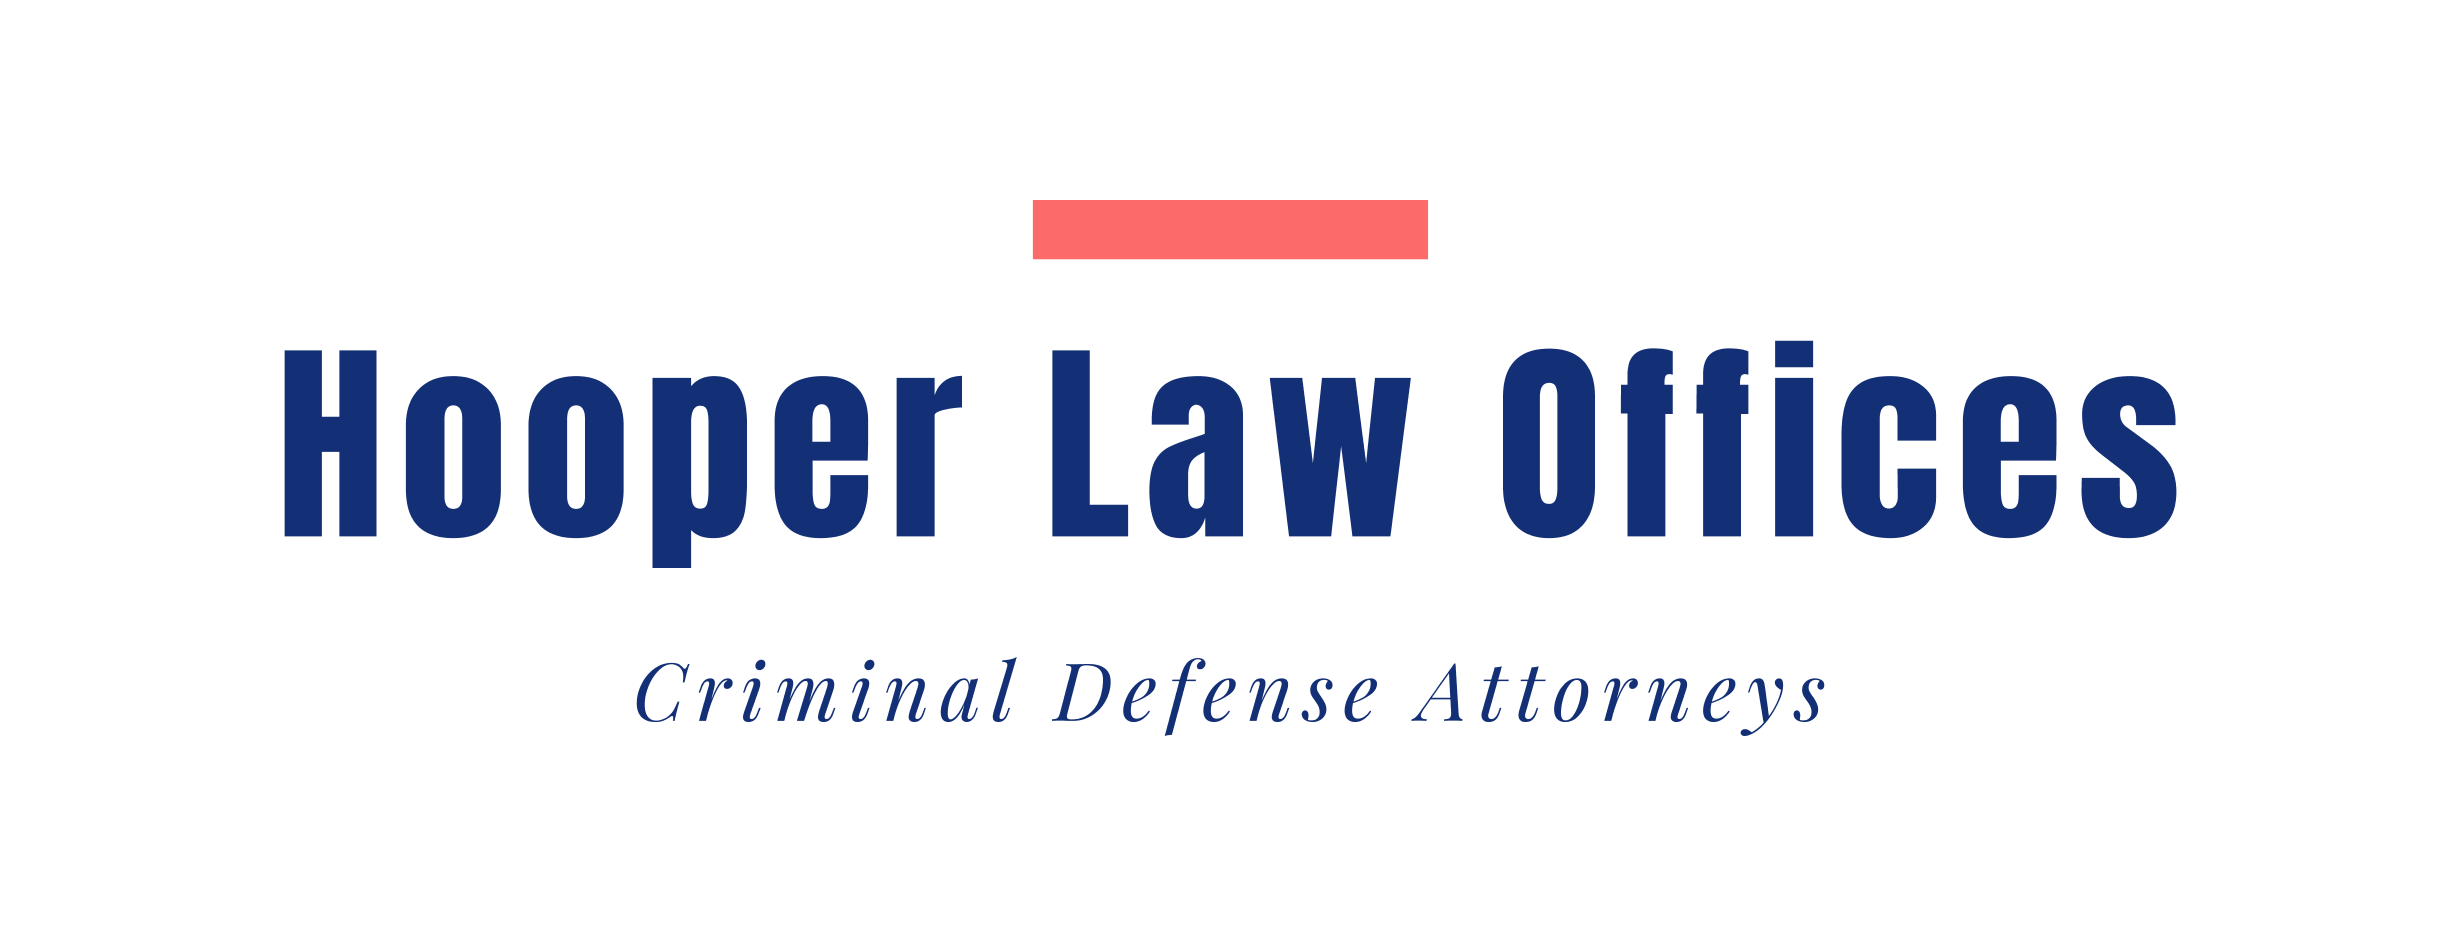 Hooper Law Offices cover